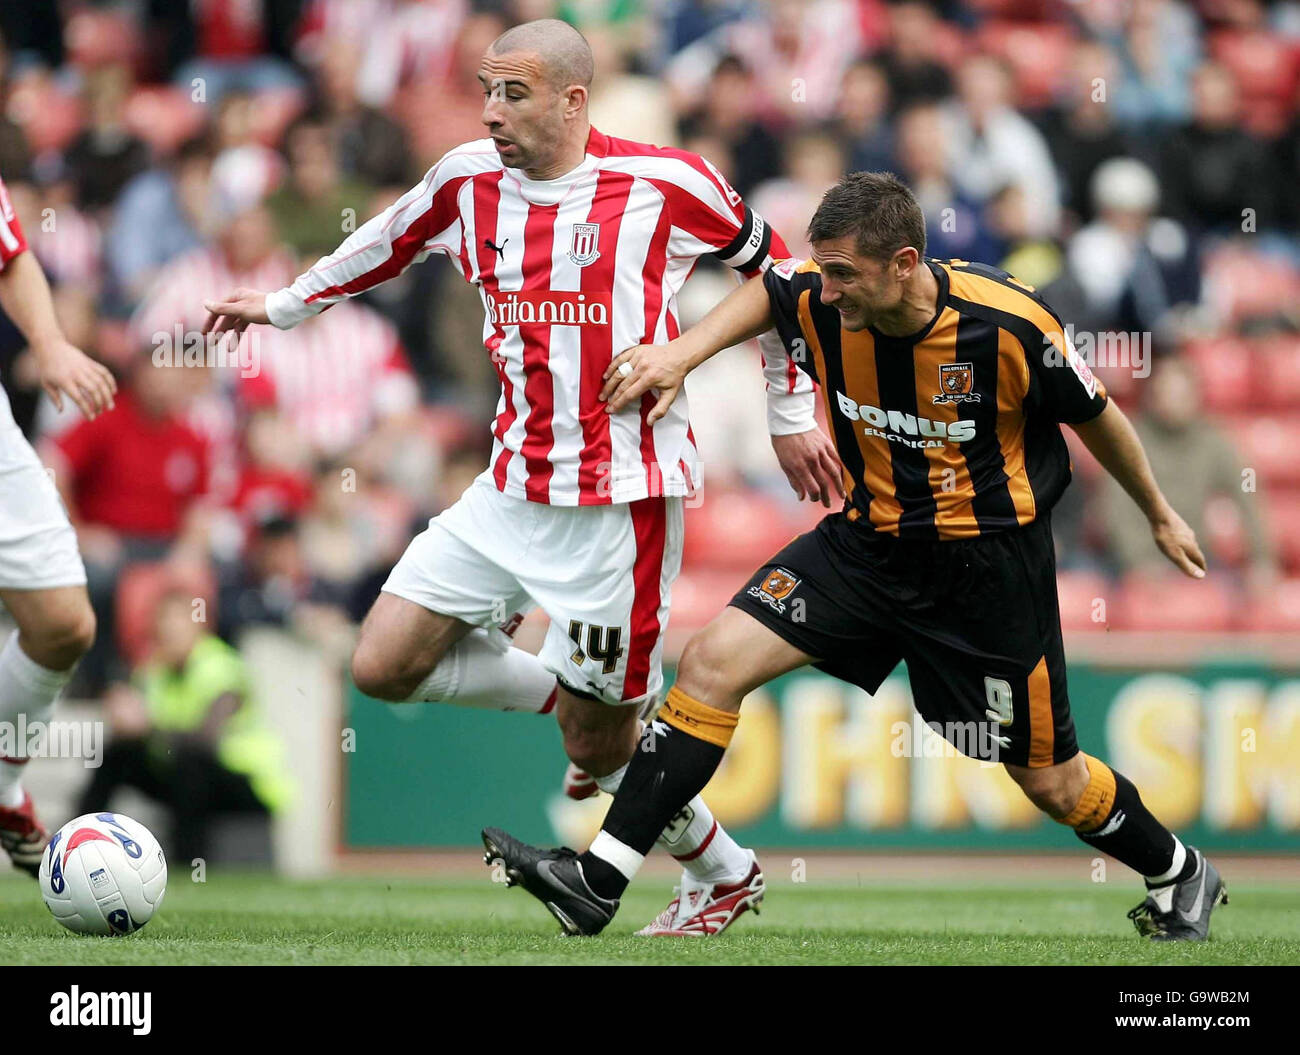 Stoke's Danny Higginbottom and Hull's Nicky Forster (right) battle for the ball during the Coca-Cola Football Championship match at the Britannia Stadium, Stoke. Stock Photo